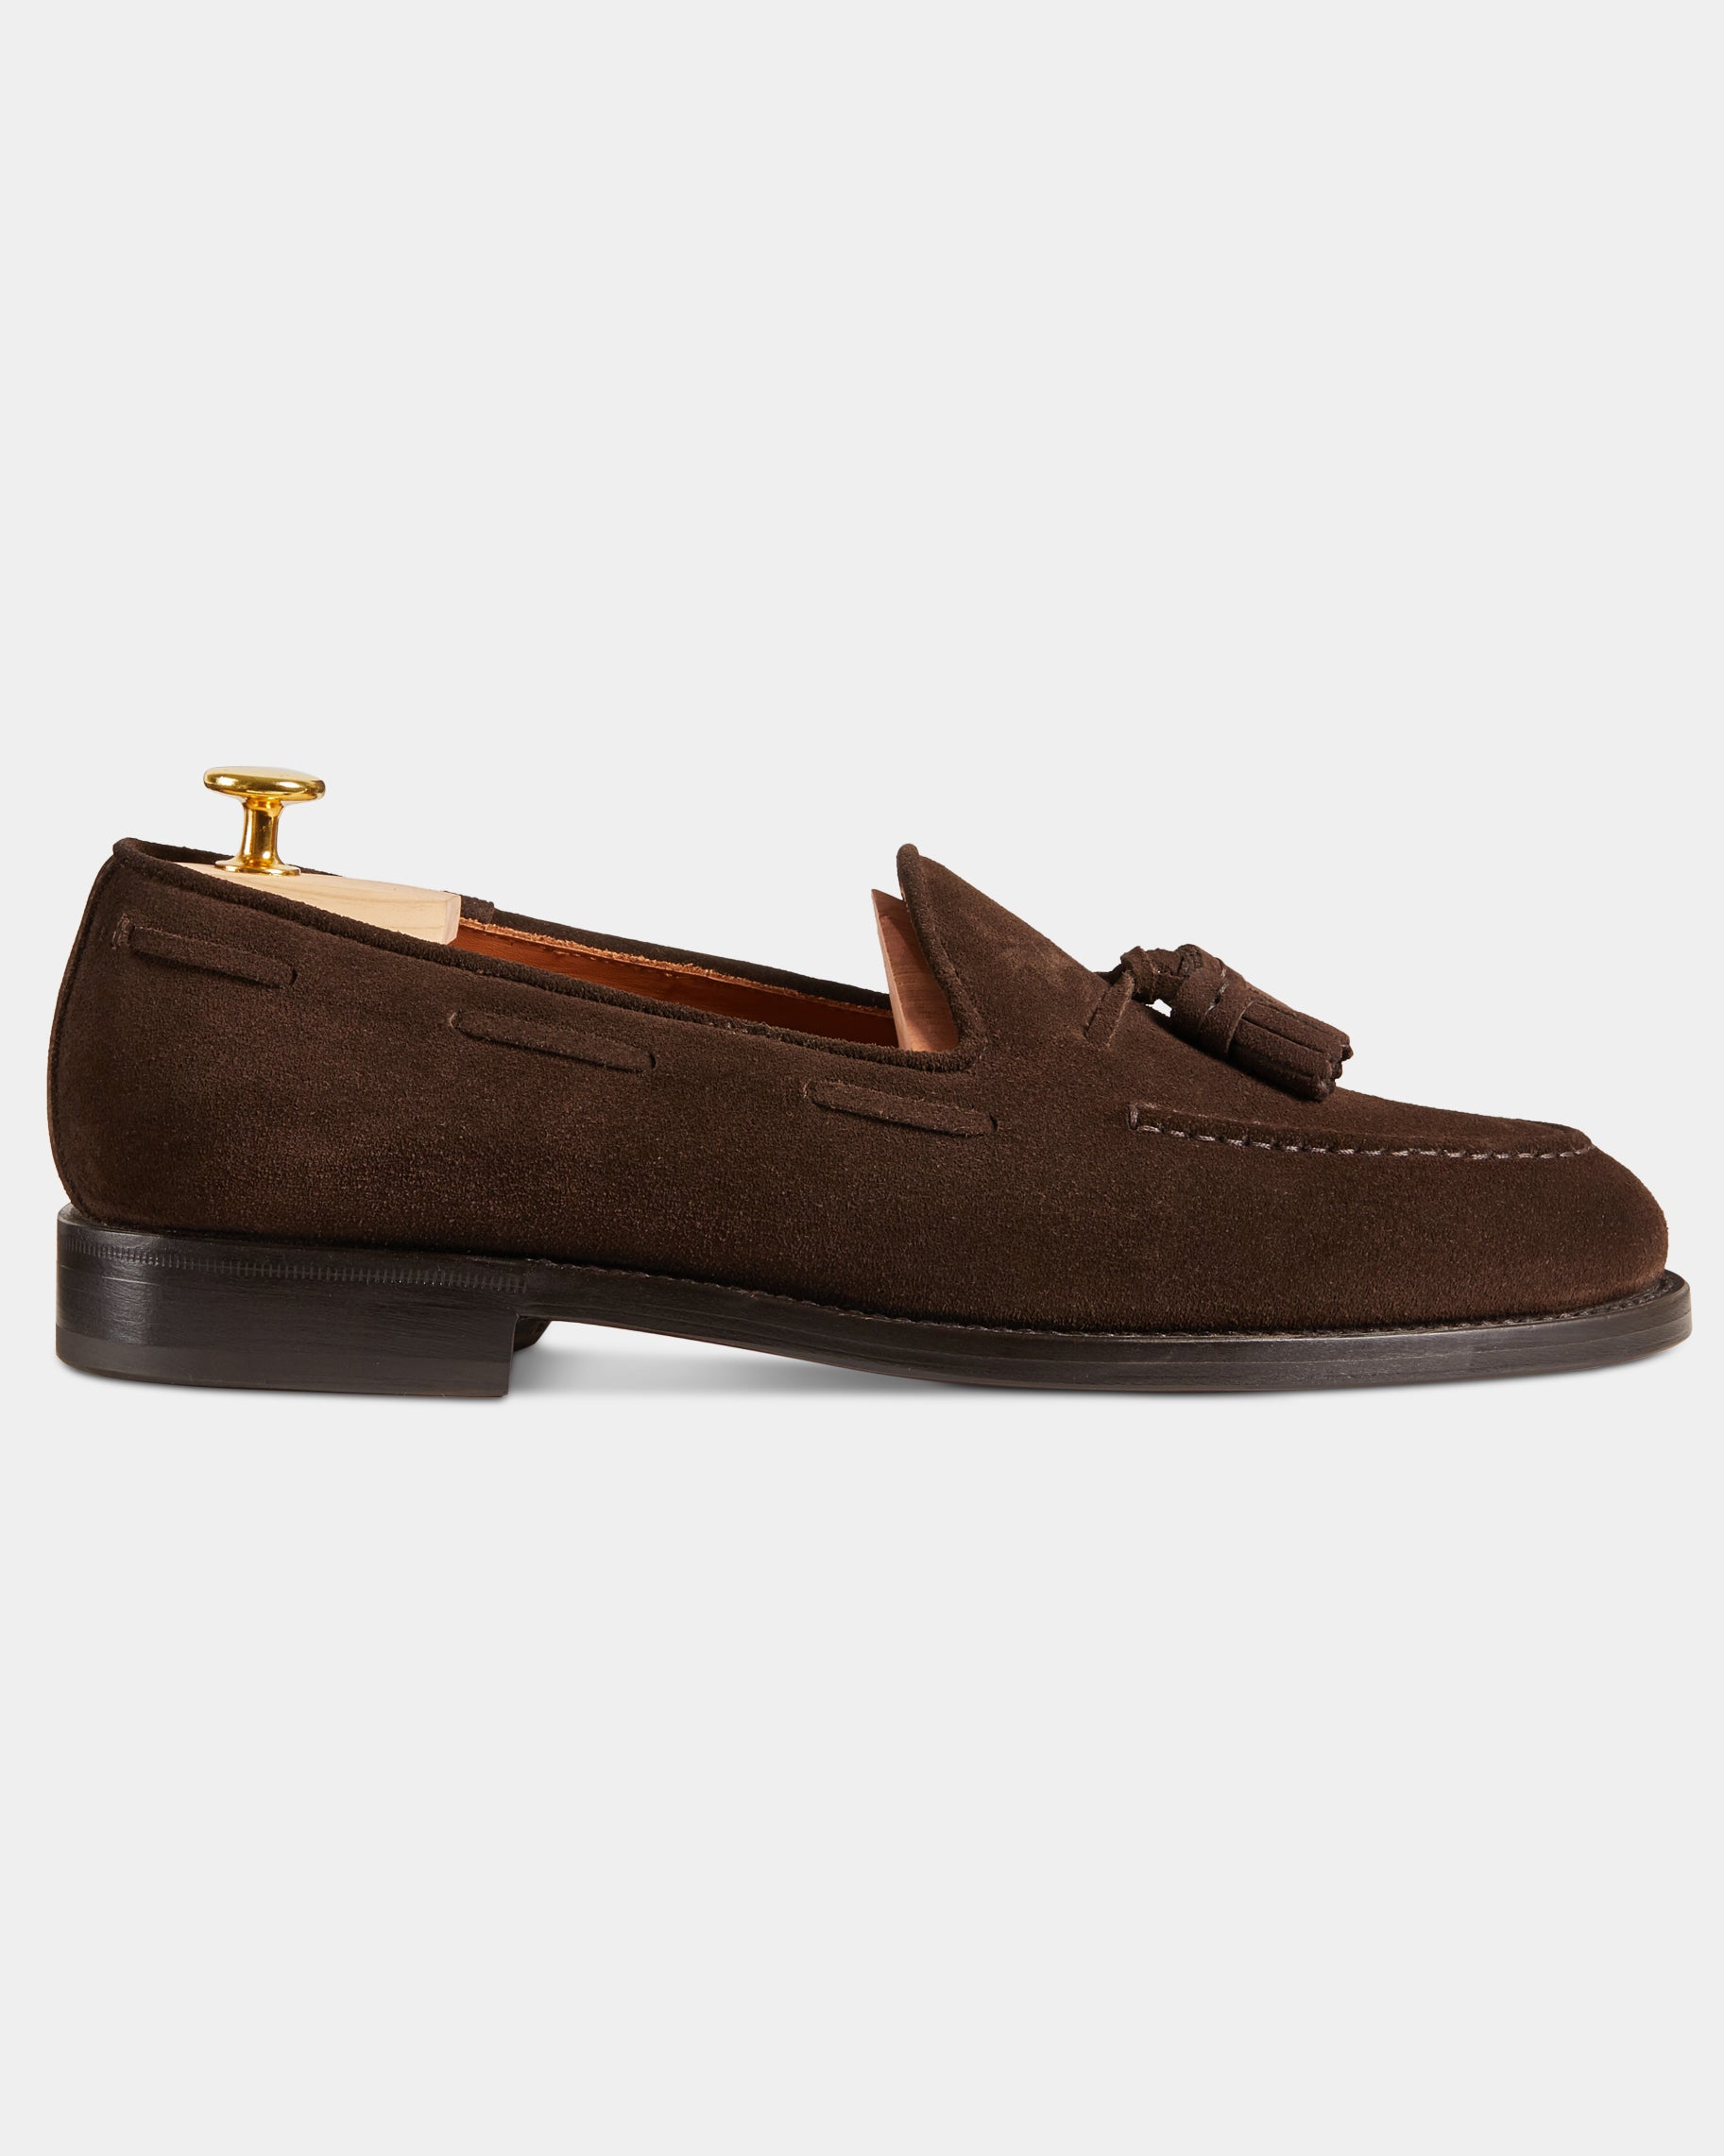 Men's suede leather Loafers with Tassels | Velasca